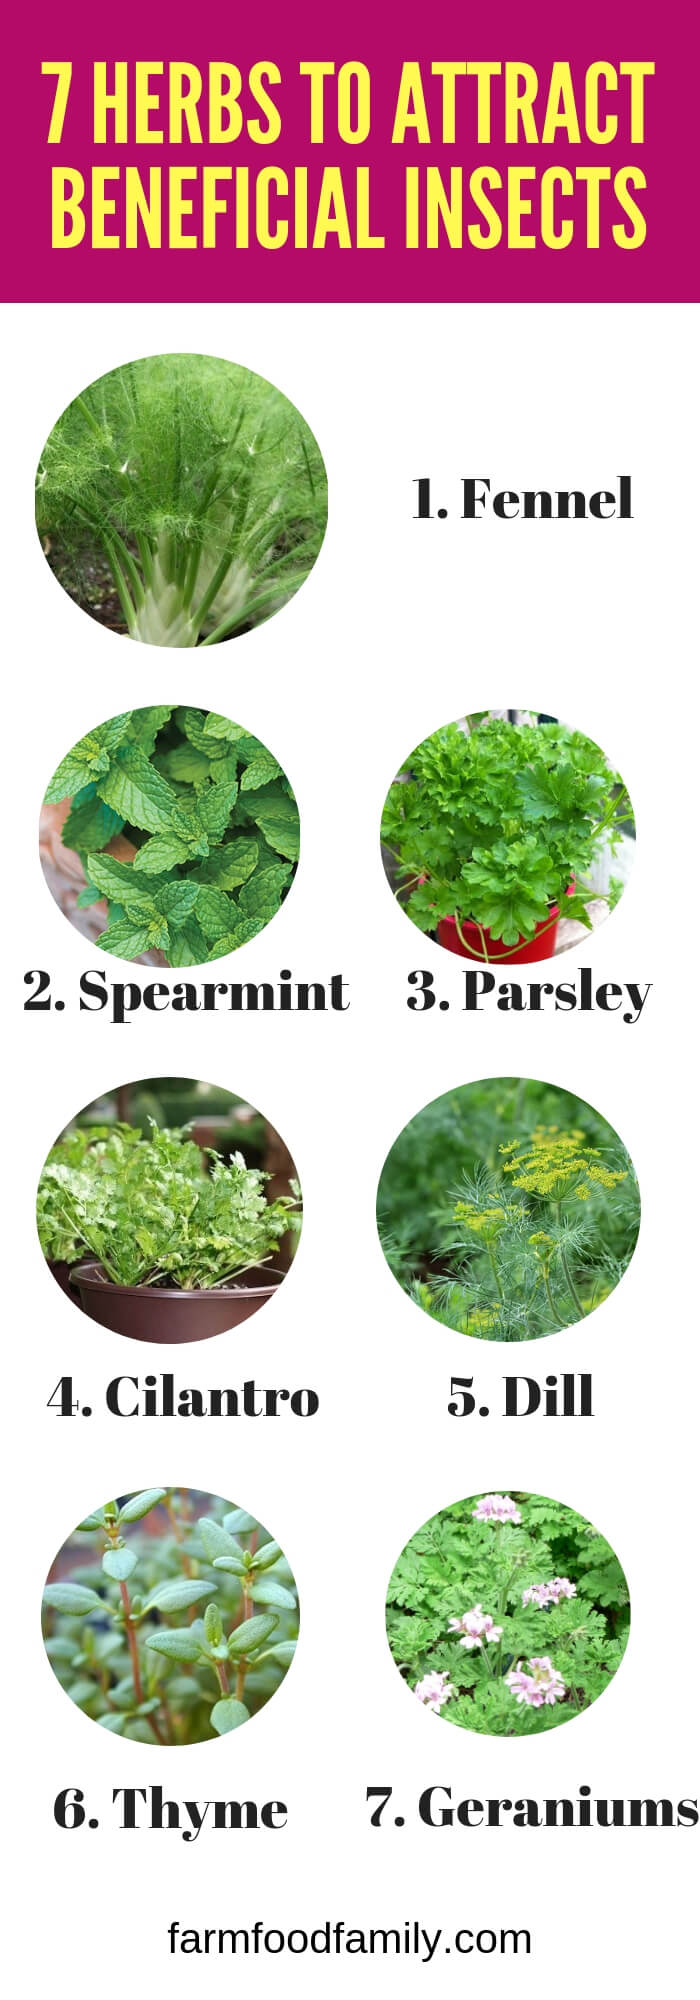 Herbs to Plant to Attract Beneficial Insects